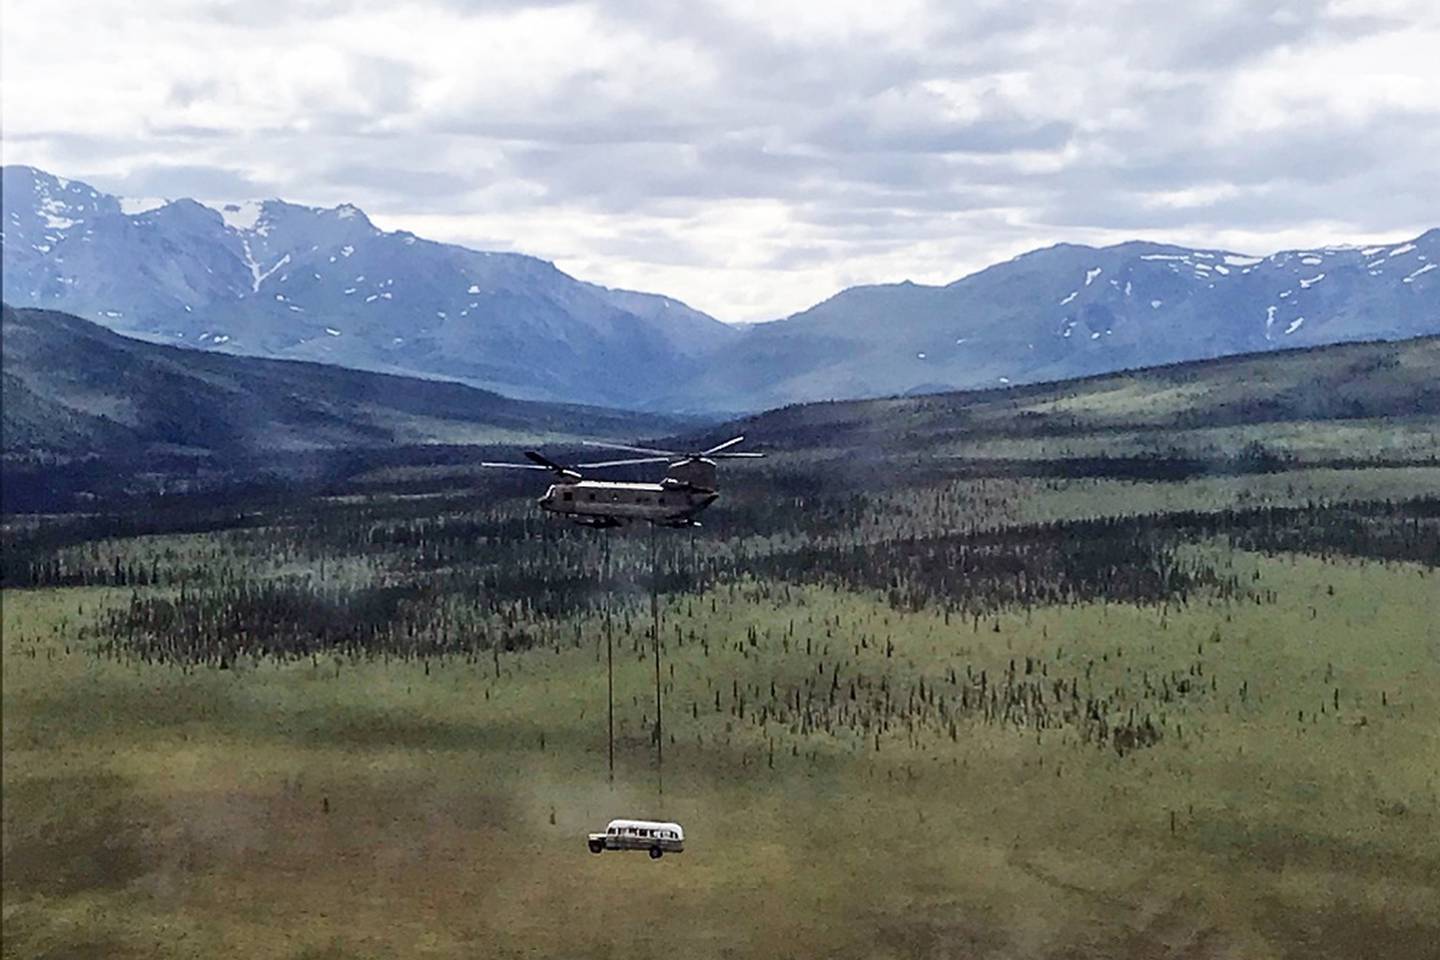 In this photo released by the Alaska National Guard, Alaska Army National Guard soldiers use a CH-47 Chinook helicopter to airlift an abandoned bus, popularized by the book and movie "Into the Wild," out of its location in the Alaska backcountry in light of public safety concerns, as part of a training mission Thursday, June 18, 2020.